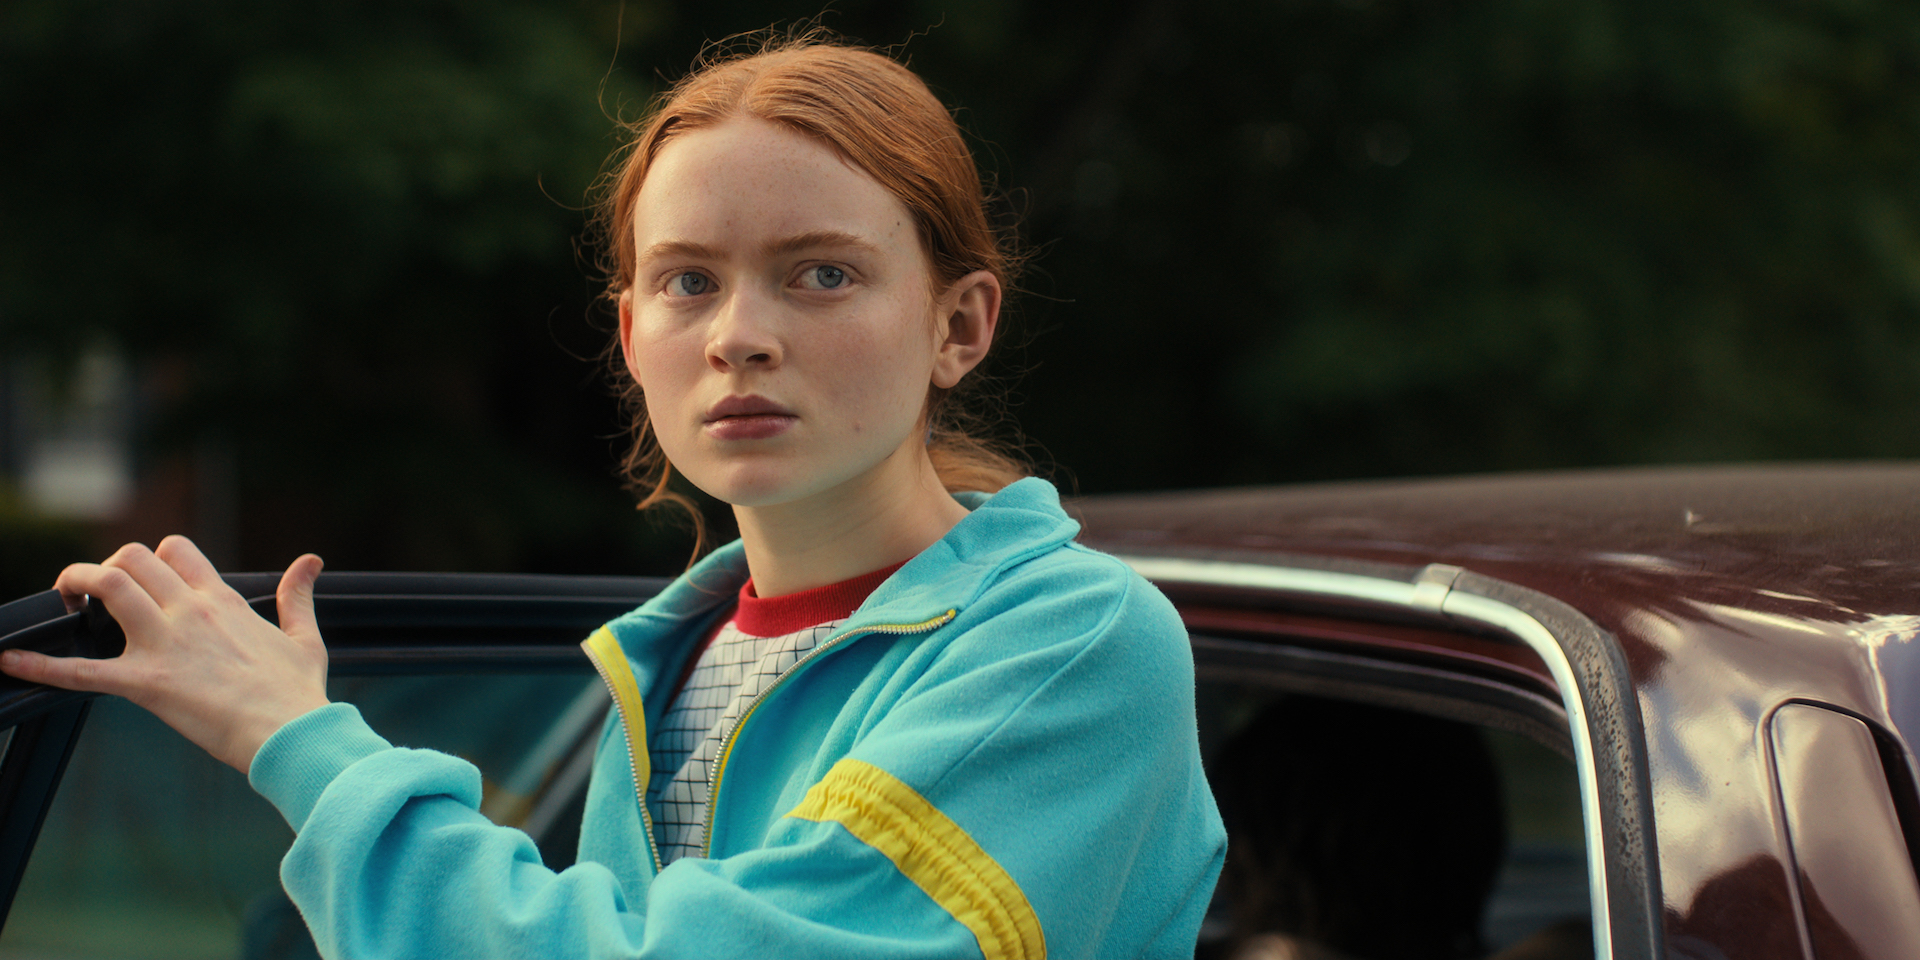 Stranger Things star, Sadie Sink, won the Hollywood Critics Association (HCA) TV Award for Best Supporting Actress in a Streaming Series, Drama this past weekend on August 14. Her role as Max Mayfield in the latest season of Stranger Things has received acclamation from audiences of the show.